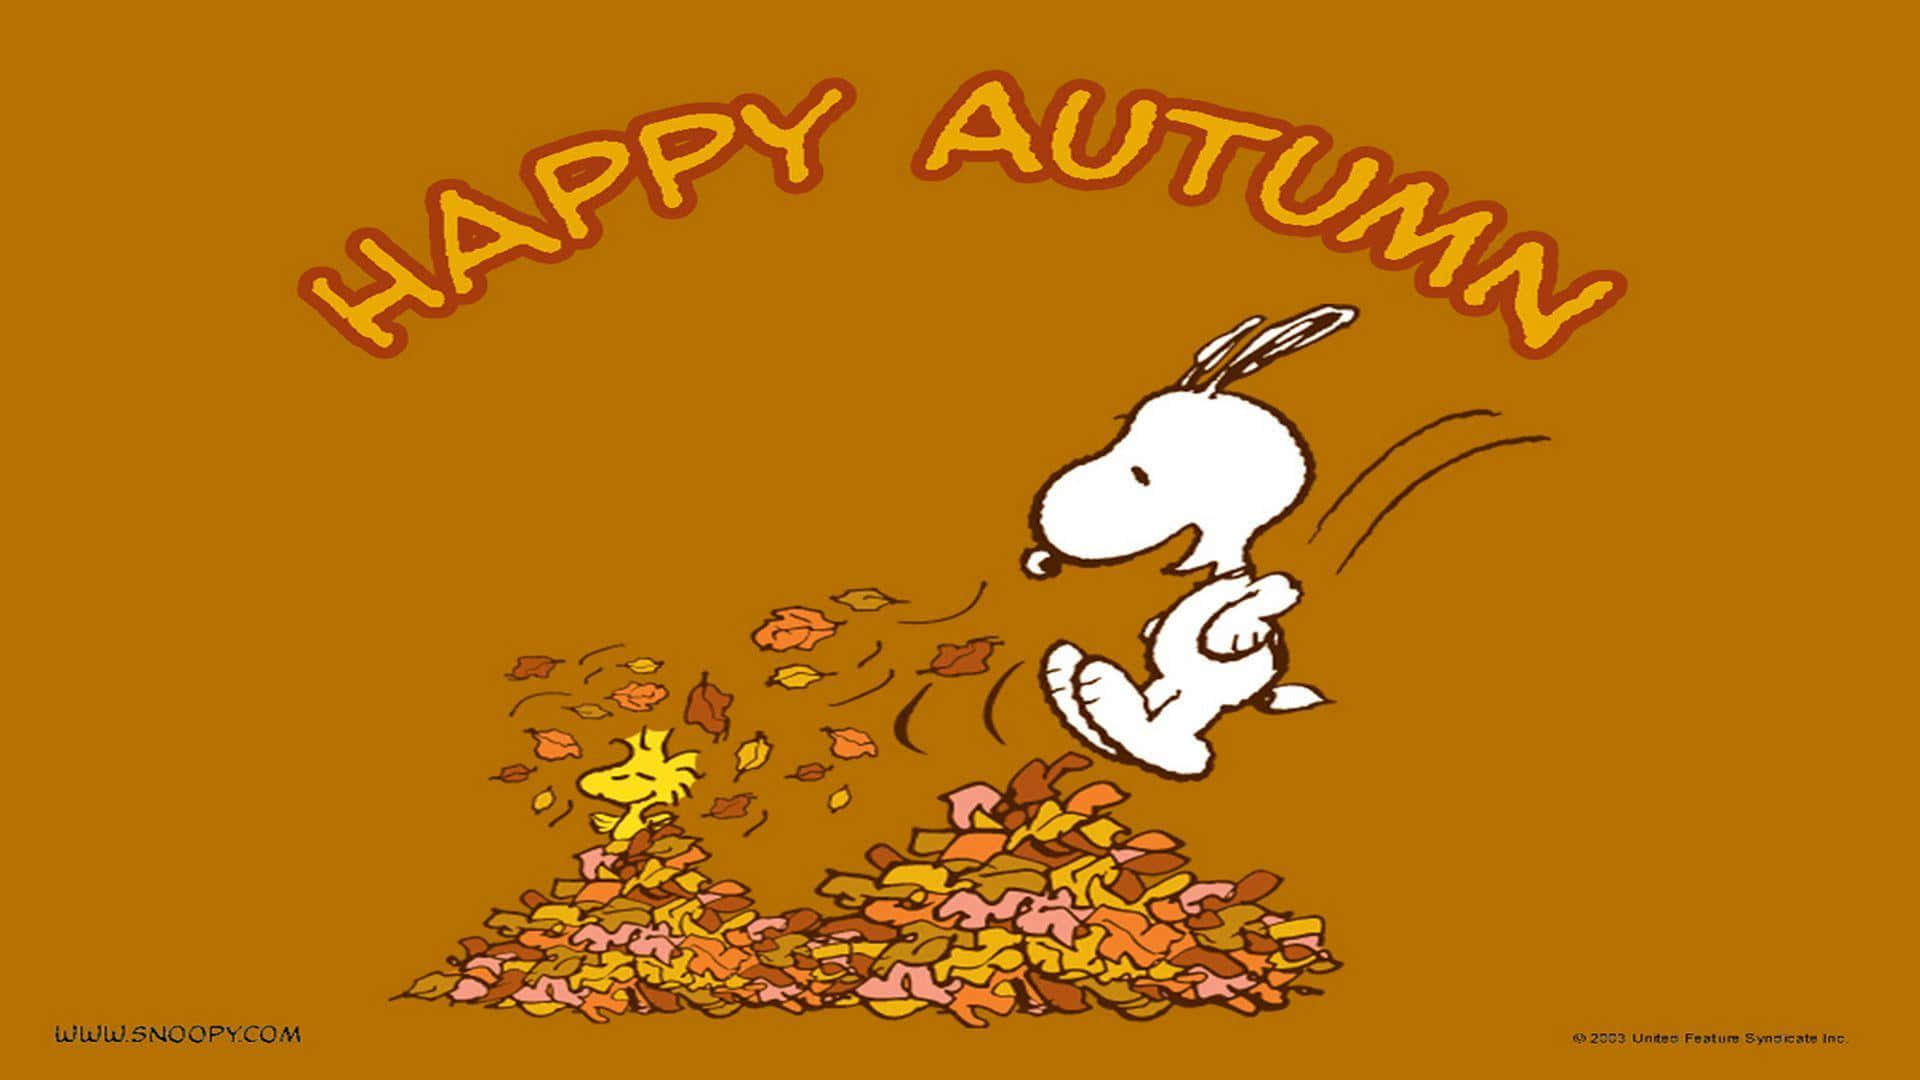 Snoopy Celebrates Thanksgiving with a Gratitude-Filled Heart. Wallpaper